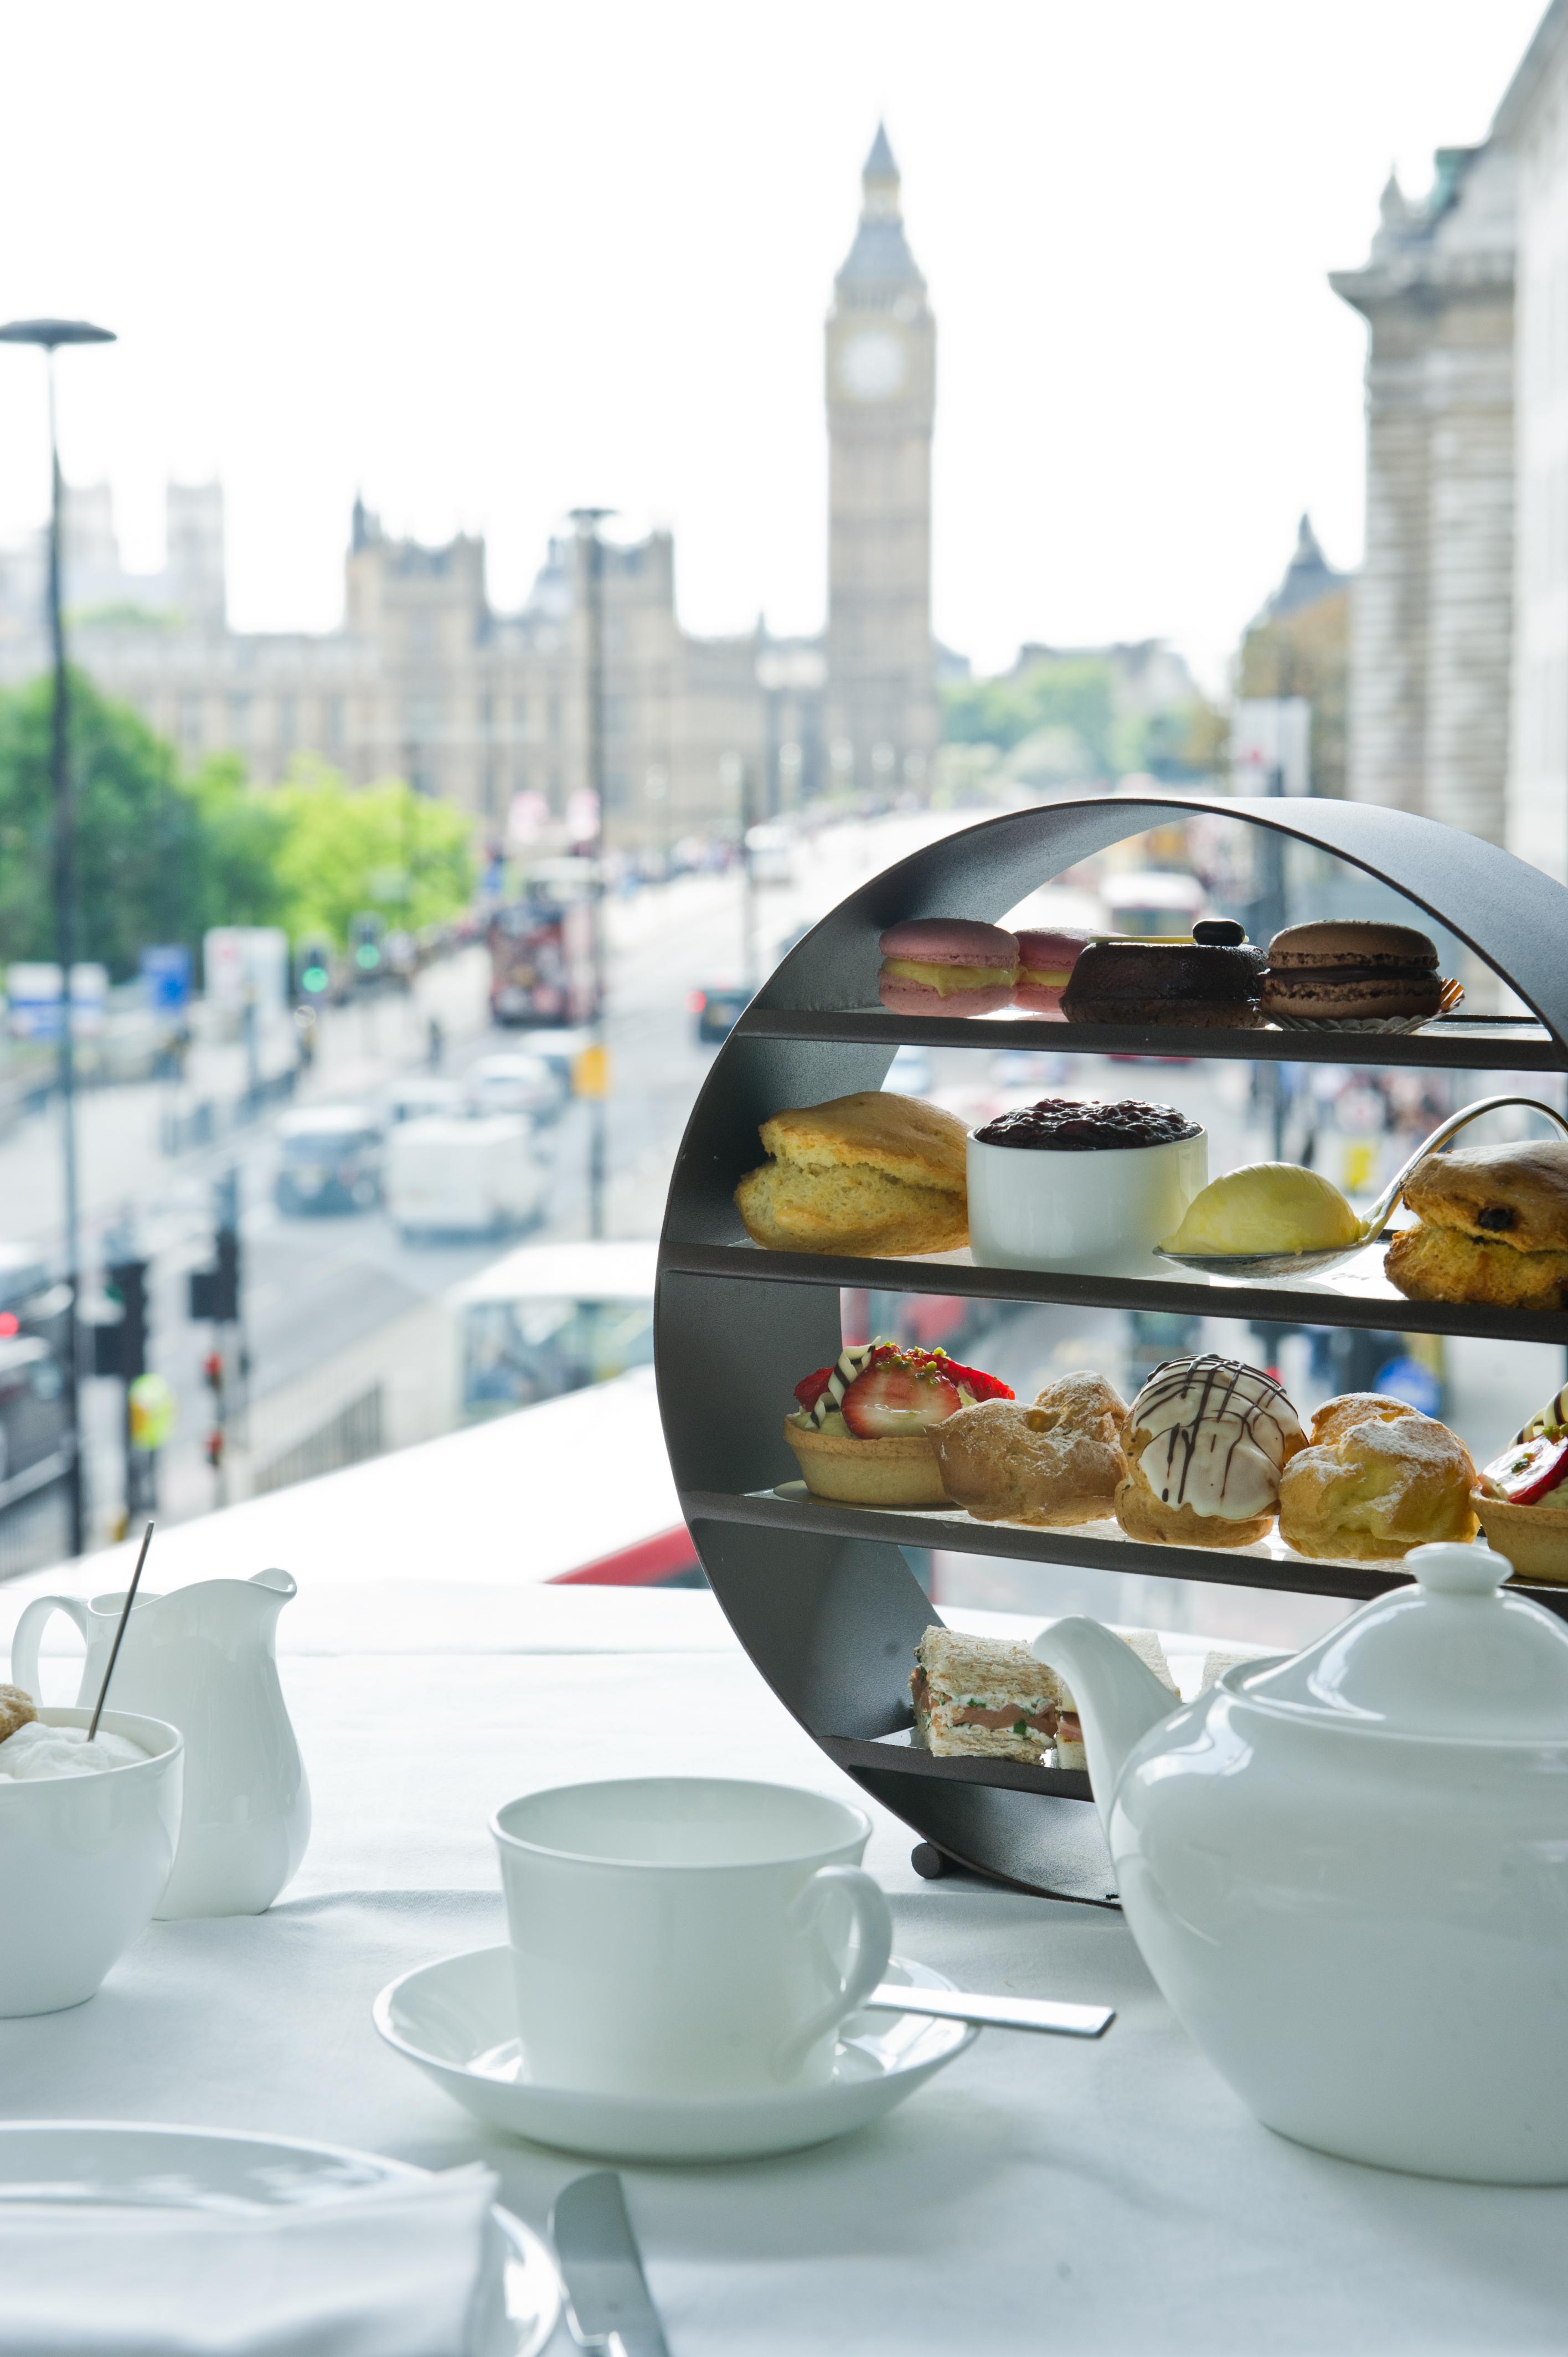 Park Plaza London Afternoon Tea Business Good Morning - Afternoon Tea With View London - HD Wallpaper 